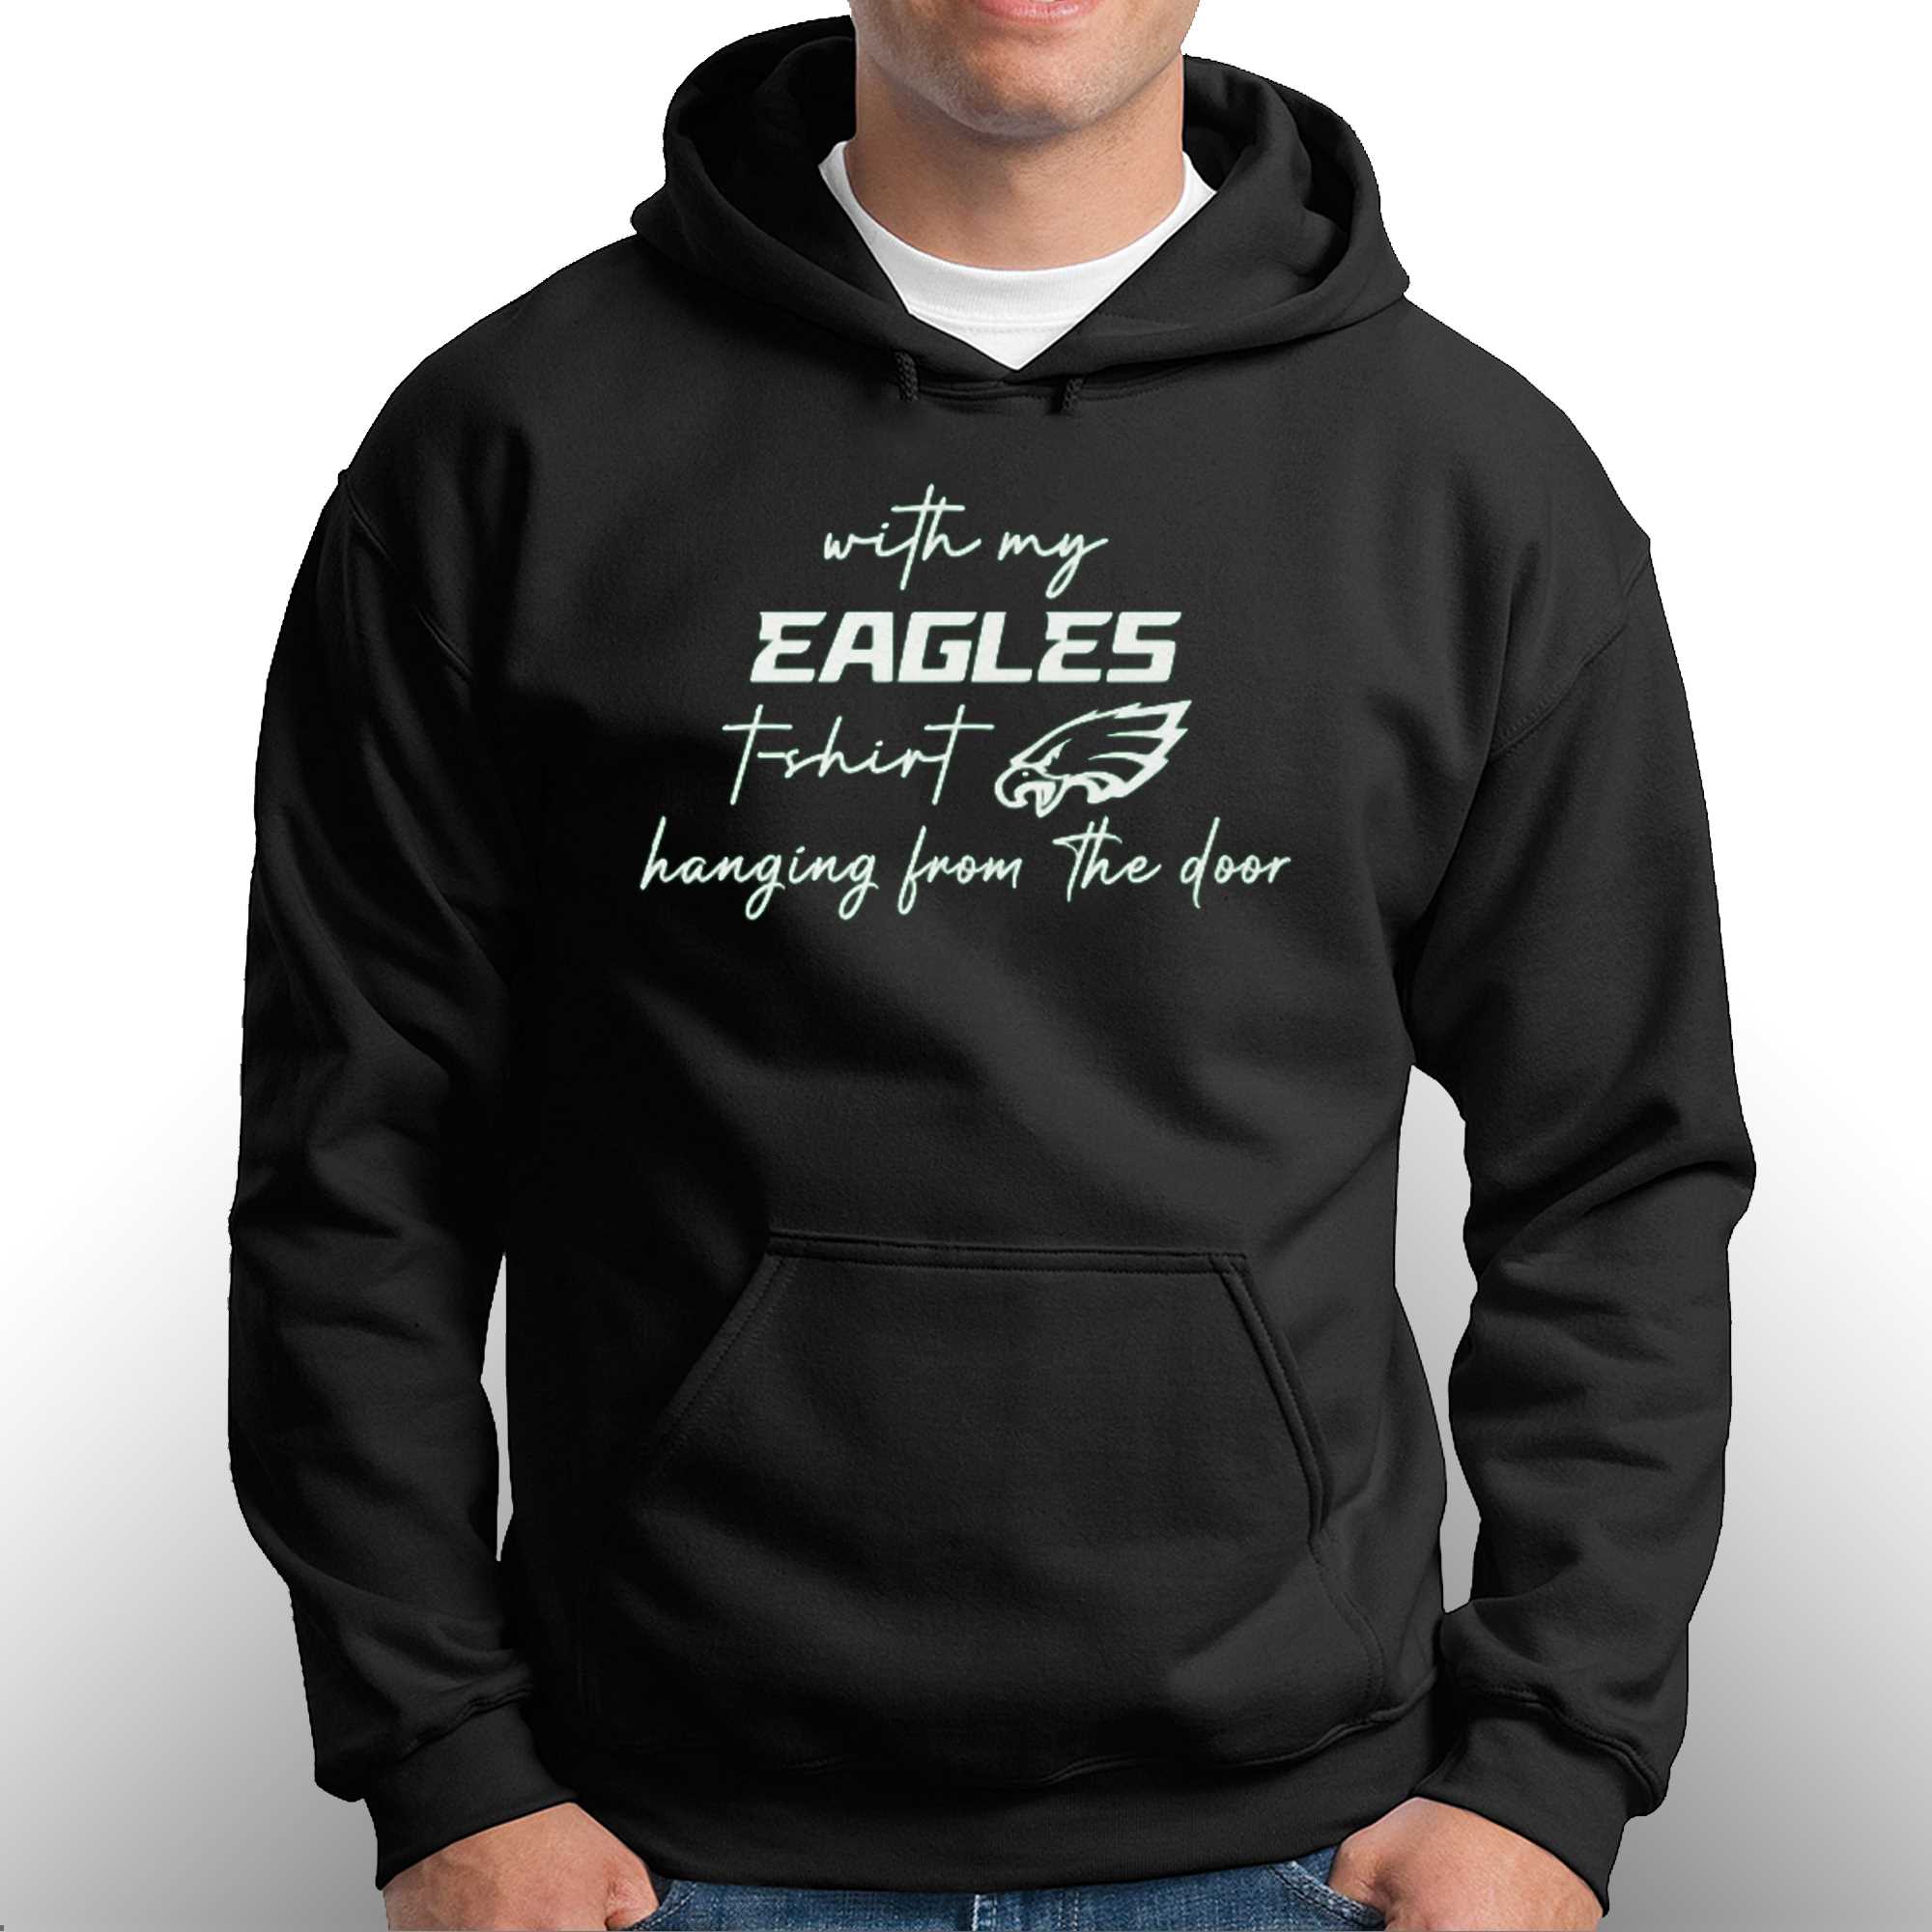 New NFL Logo Taylor Swift Eagles T Shirt, With My Eagles T Shirt Hanging  From The Door - Allsoymade